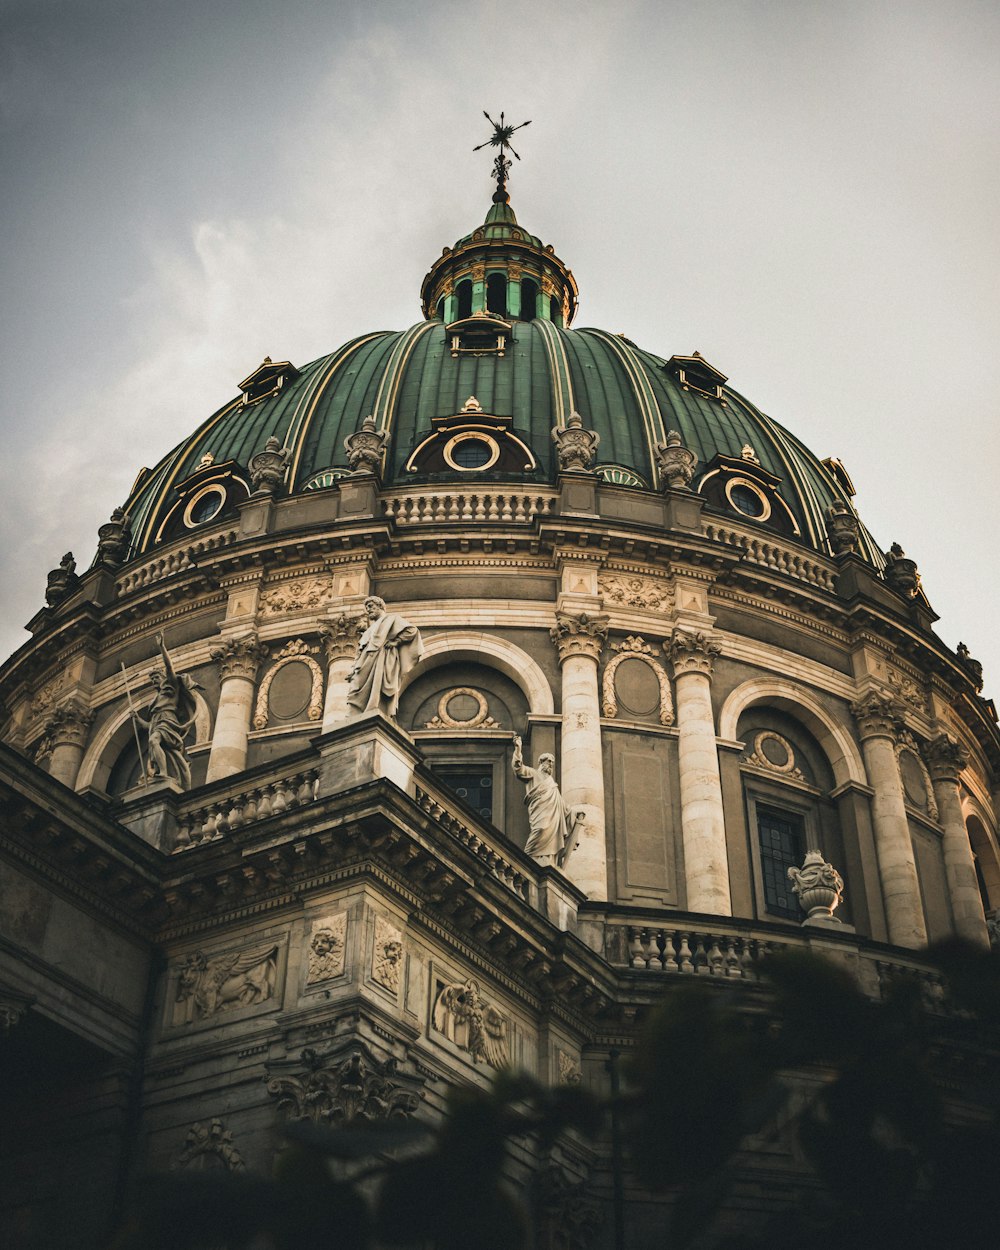 gray and green dome building